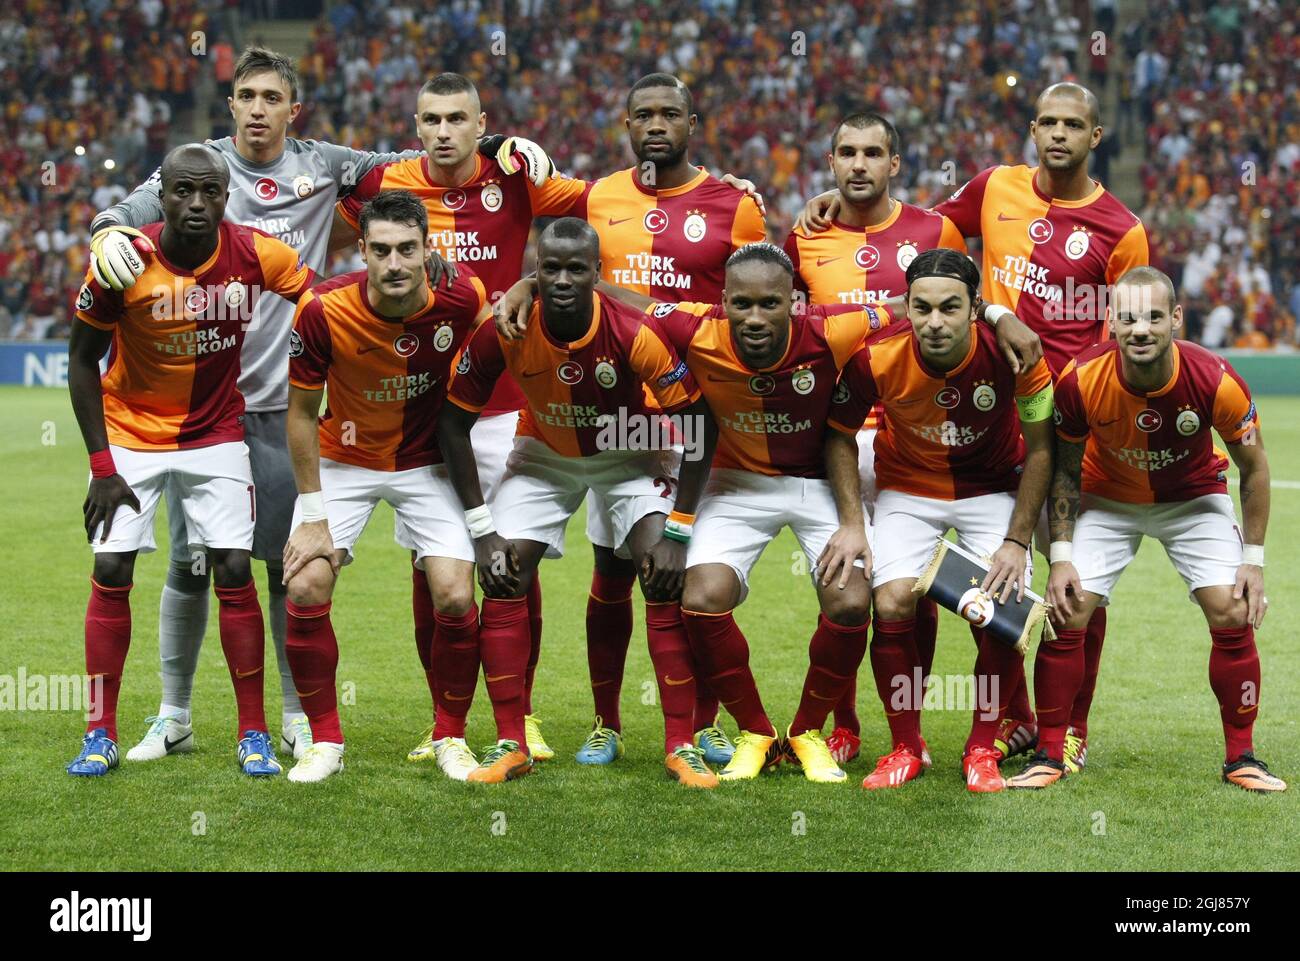 ISTANBUL 2013-09-17 Galatasaray's players during their UEFA Champions League  Group Stage Group B soccer match Galatasaray between Real Madrid at the  AliSamiYen Spor Kompleksi in Istanbul, Turkey on Tuesday 17 September 2013.